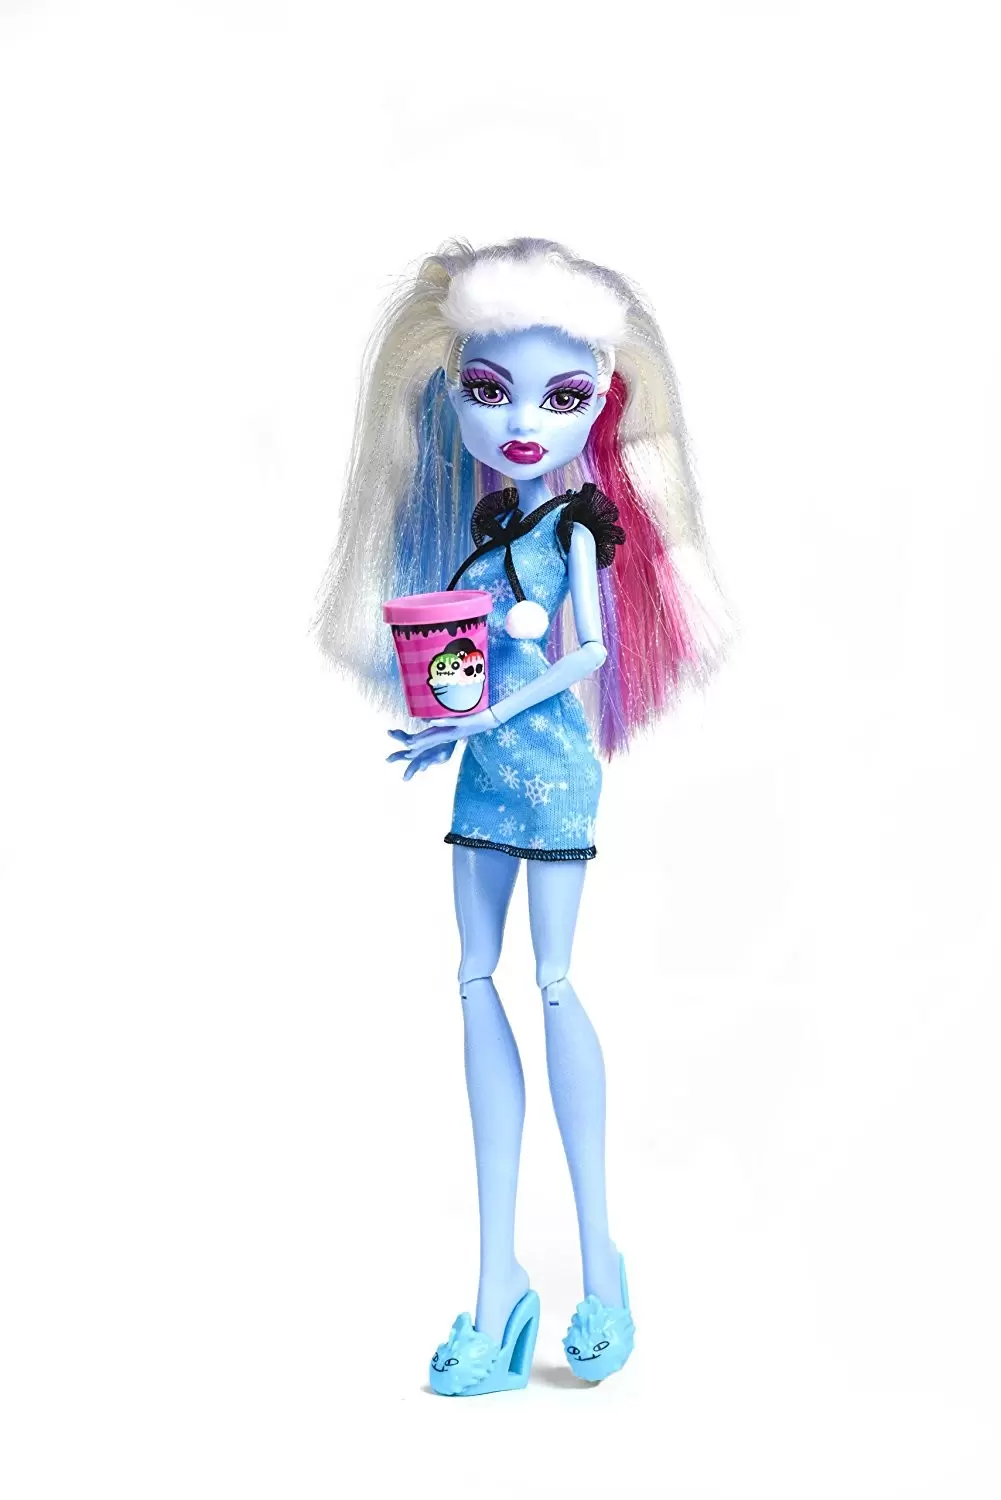 Monster High - Abbey Bominable - Dead Tired